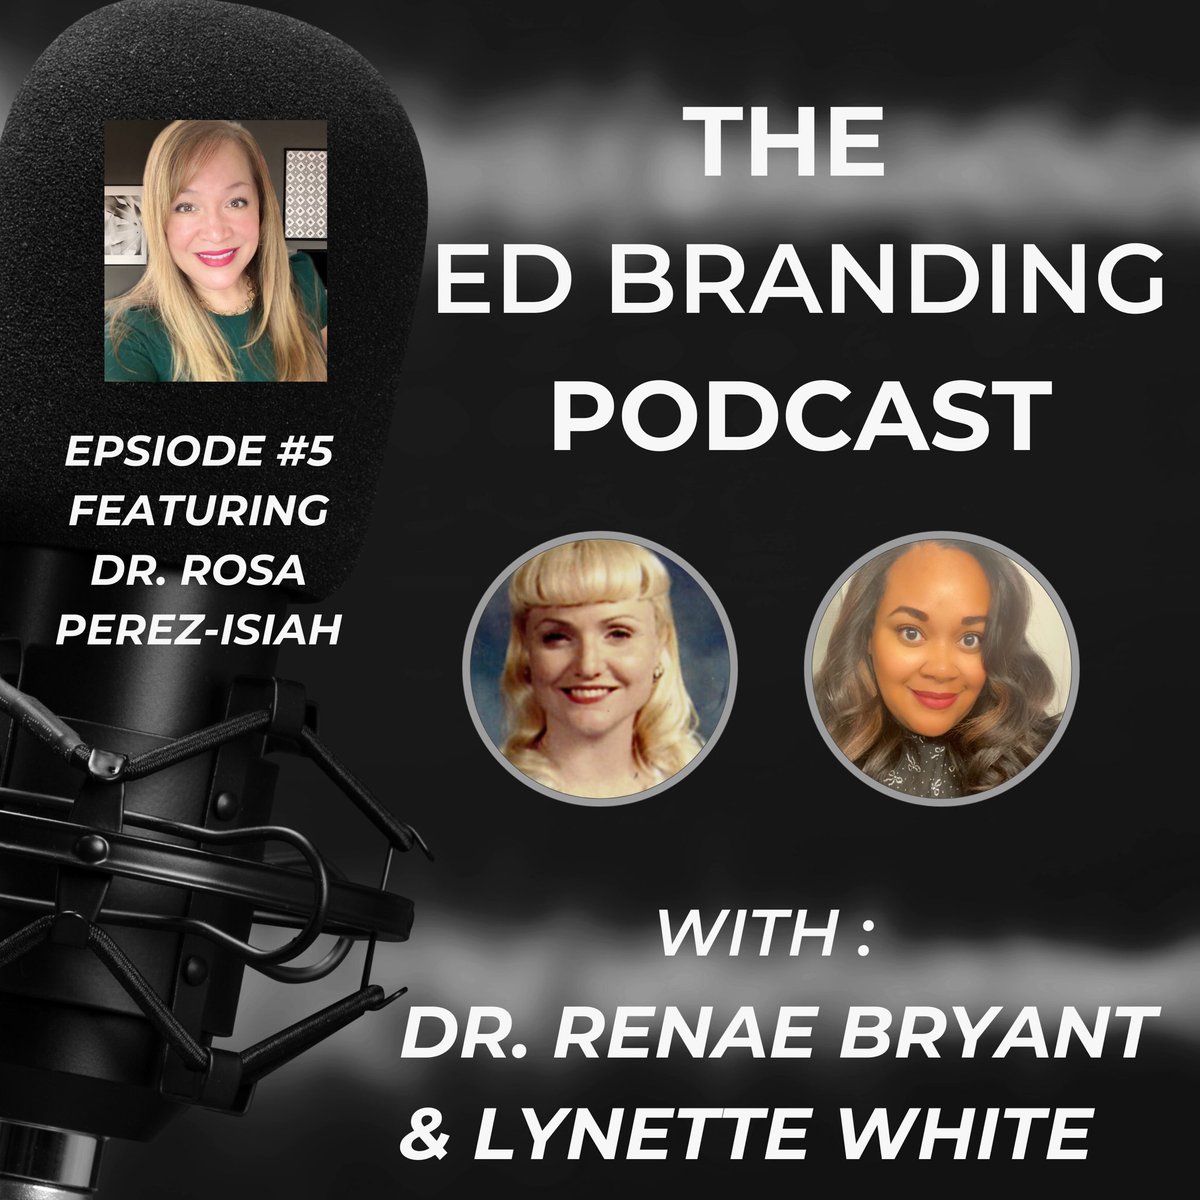 Ep #5 of the #EdBranding Podcast feat. Dr. @RosaIsiah dropped! She is a contrib author 2 multi ed mag & bks; is a Brd mbr 4 @pdkintl; was also r feat spkr 4 Beyond Convo About Race #Ldrshpbkchat. 

edbranding.buzzsprout.com 
#tellyourstory #beaconnecter #LeadLAP #WeLeadEd #BeReal